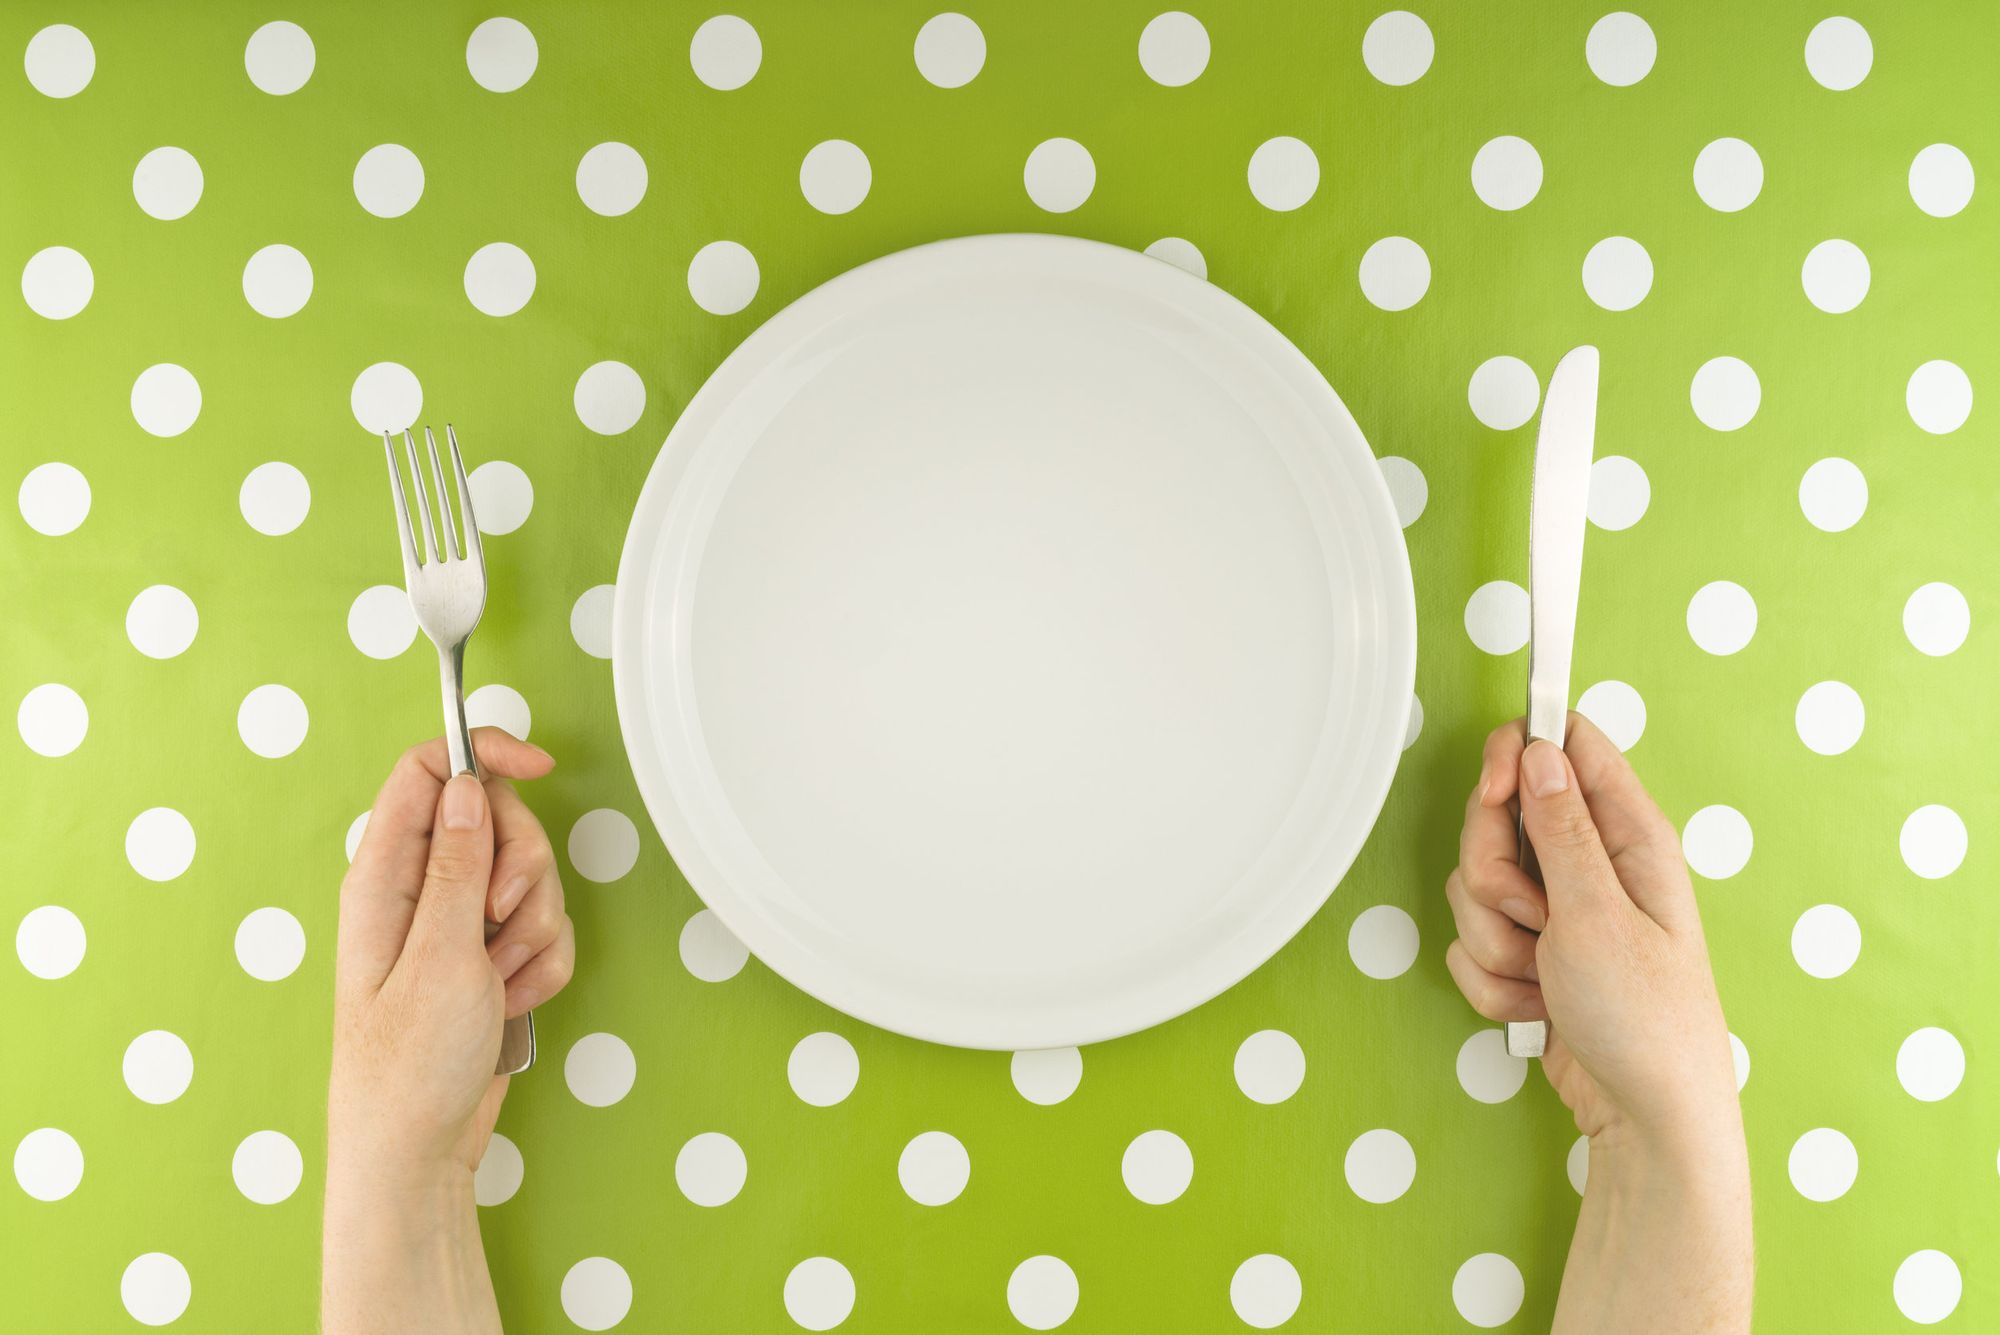 A tablecloth with a green background and white spots. Hands holding cultlery next to an empty white plate. 